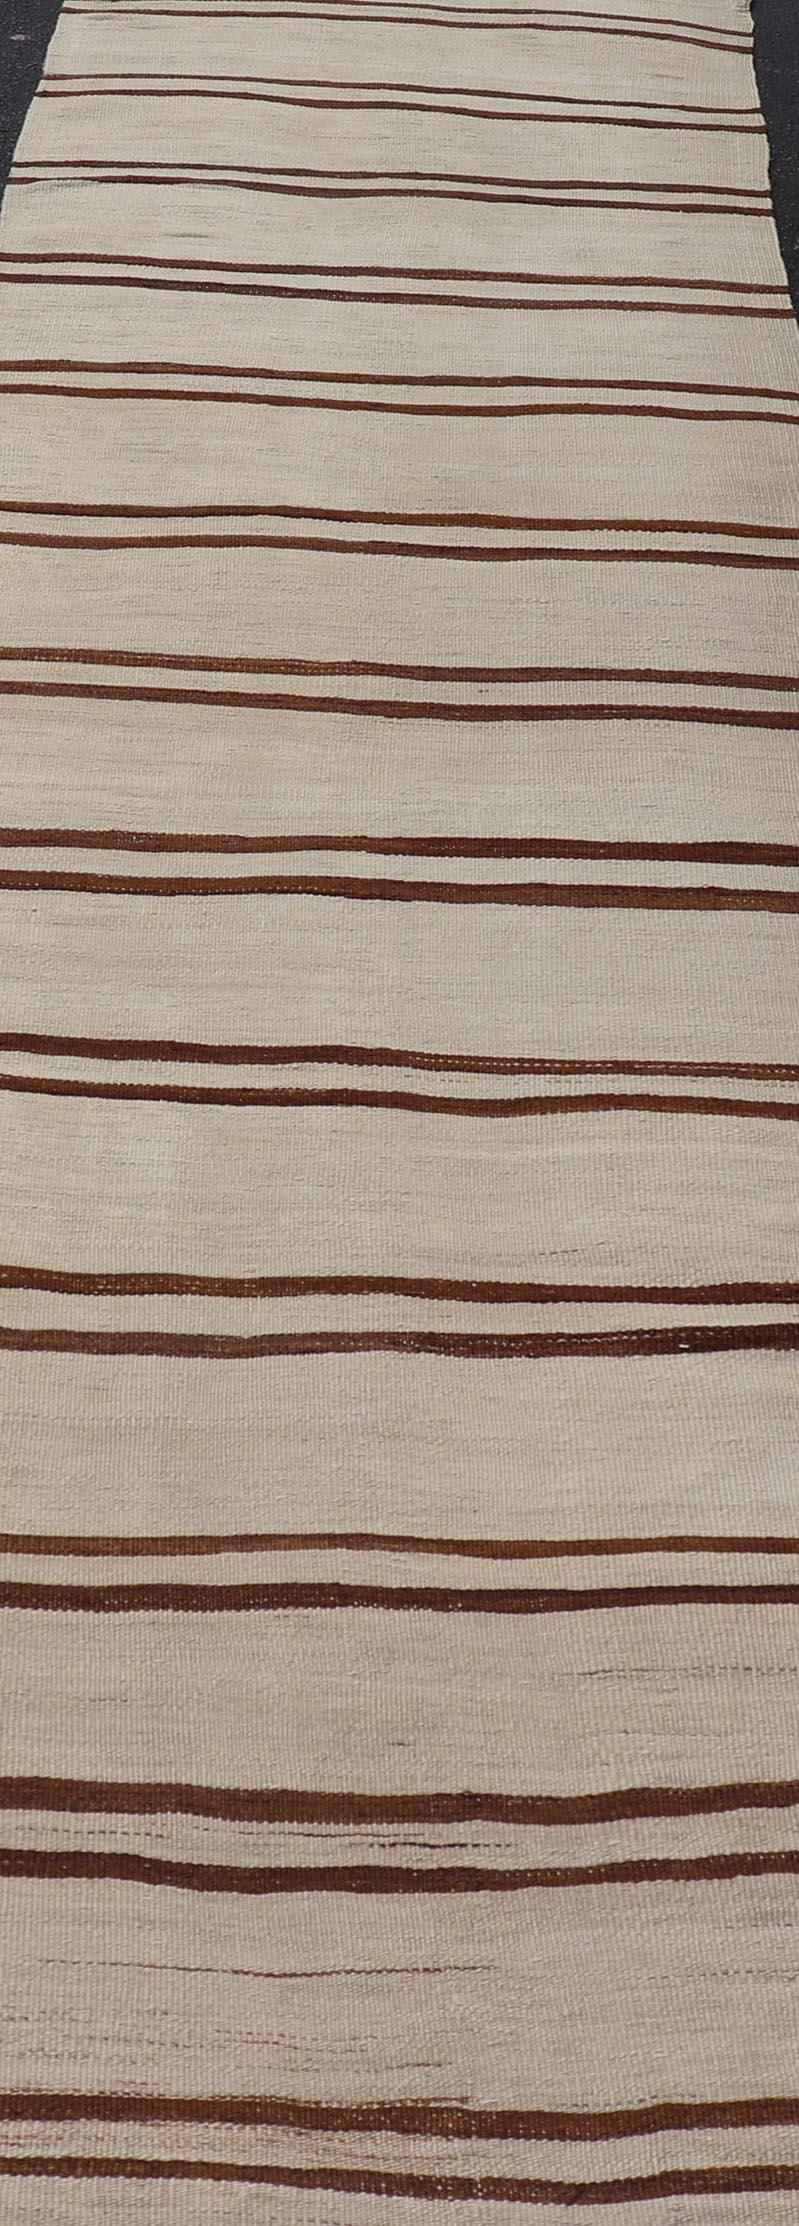 Minimalist Design Vintage Turkish Kilim Runner with Ivory, Brown and Off White  For Sale 2